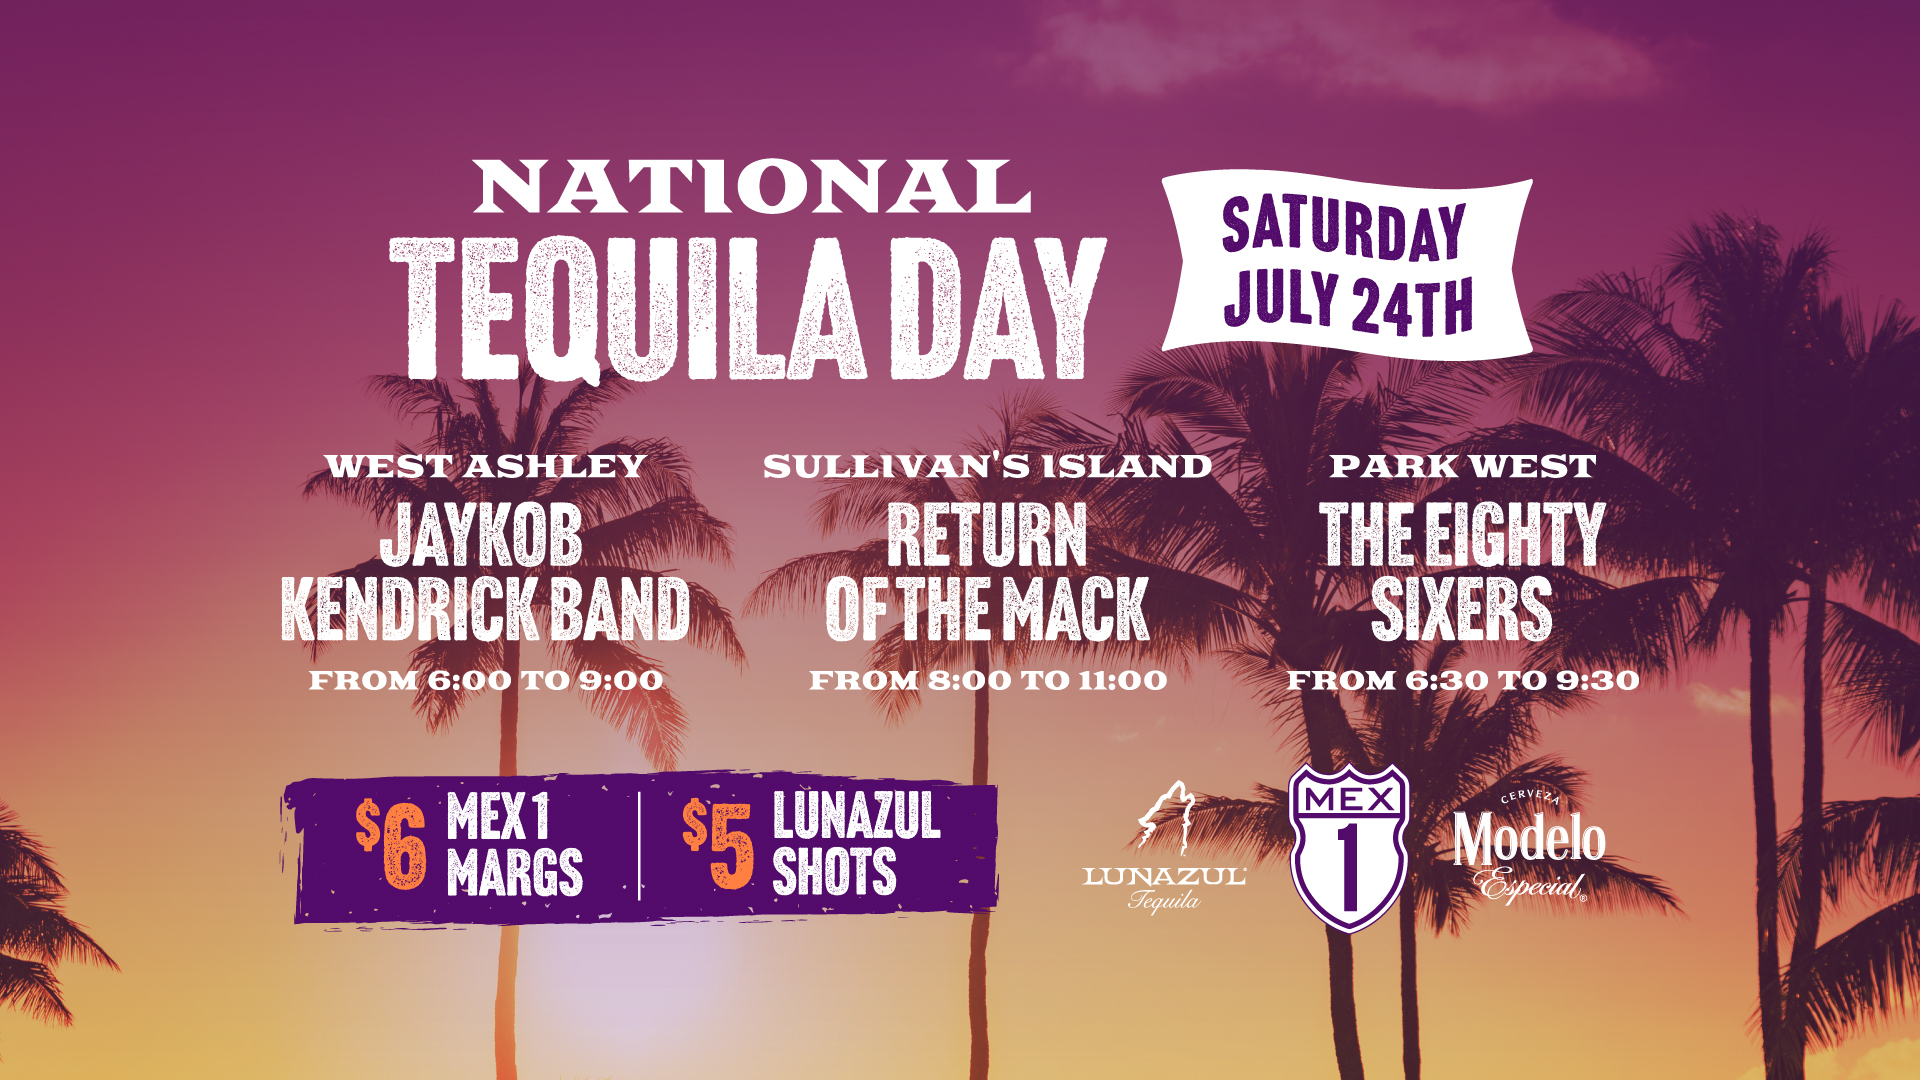 National Tequila Day 2021